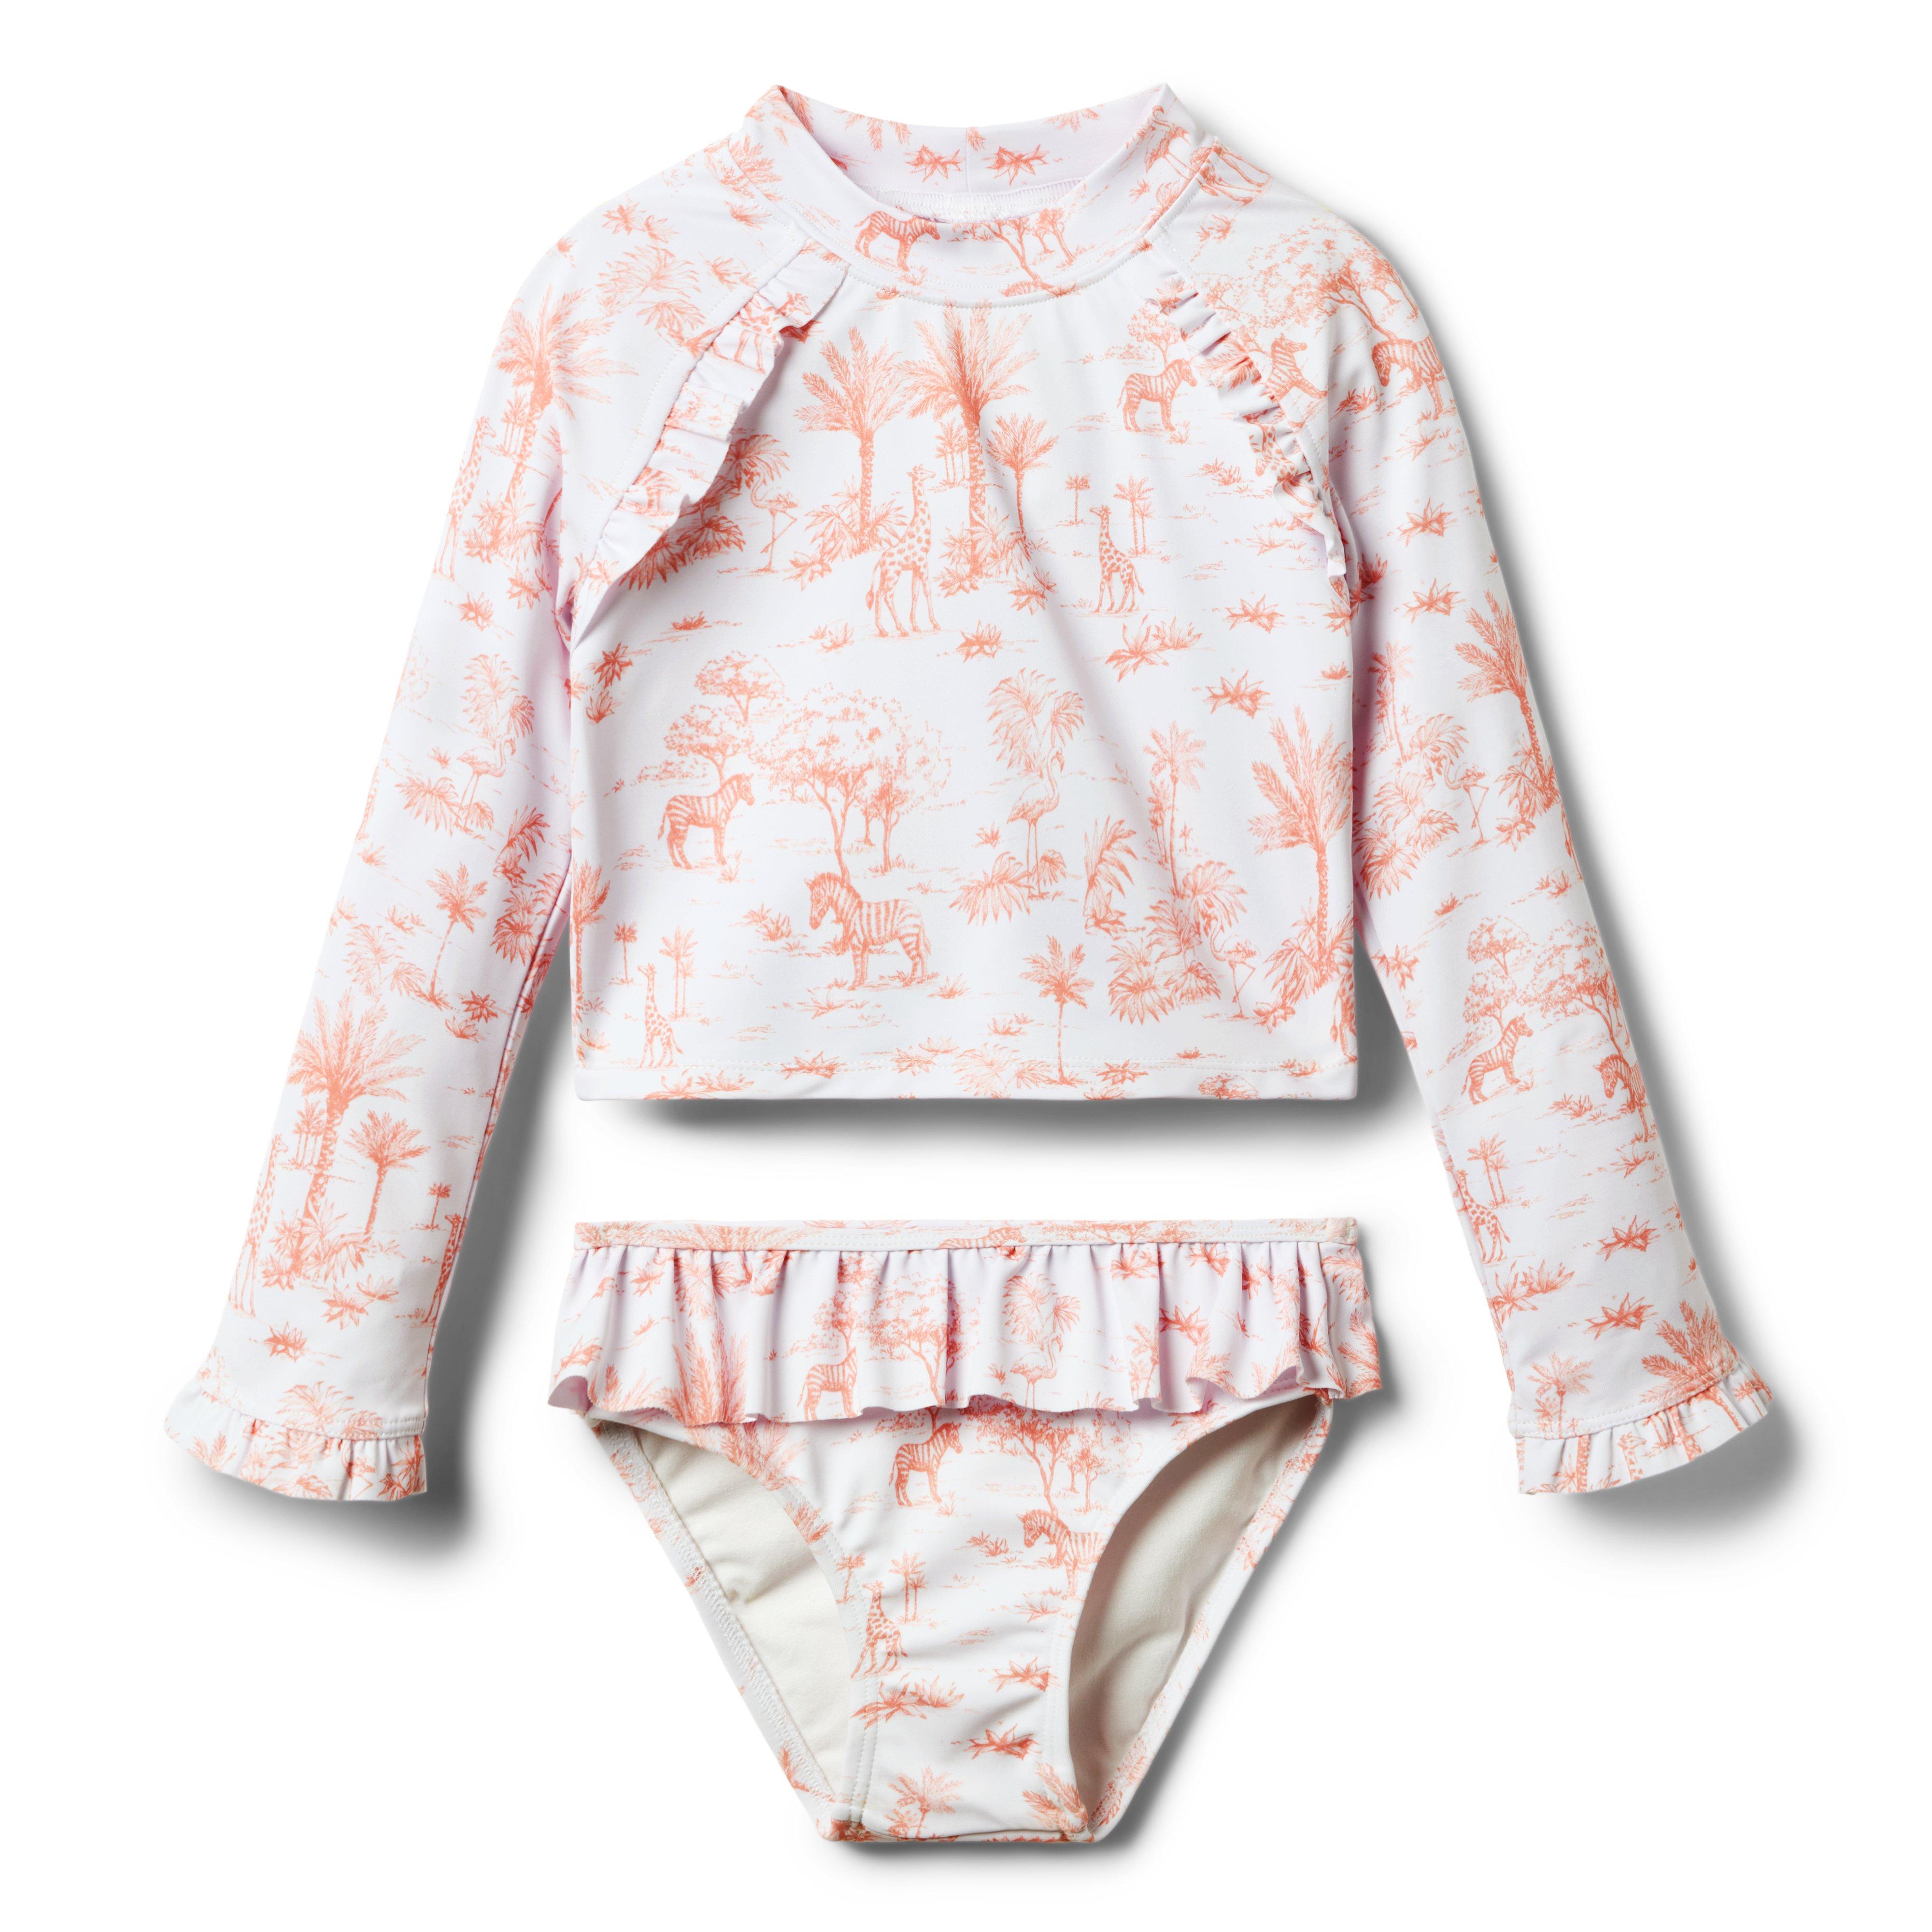 Recycled Tropical Toile Rash Guard Swimsuit